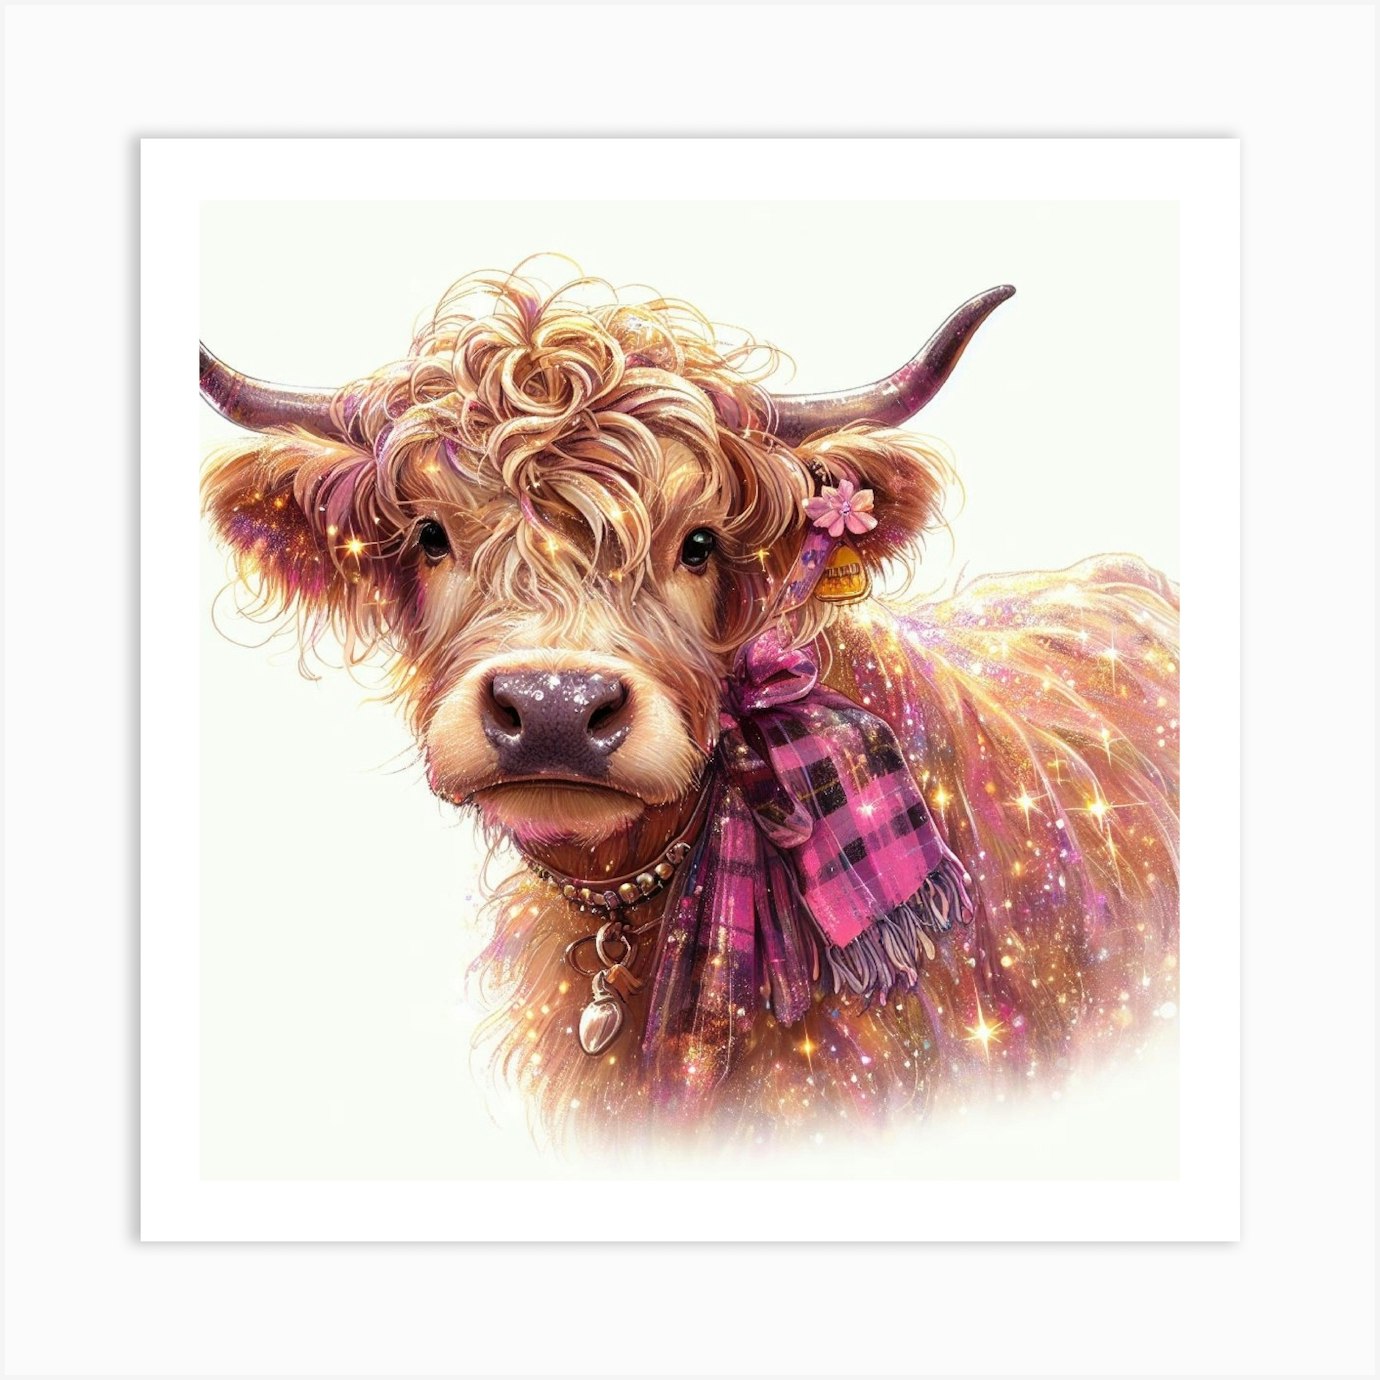 Vintage Highland Cows & Flowers 1 Fabric